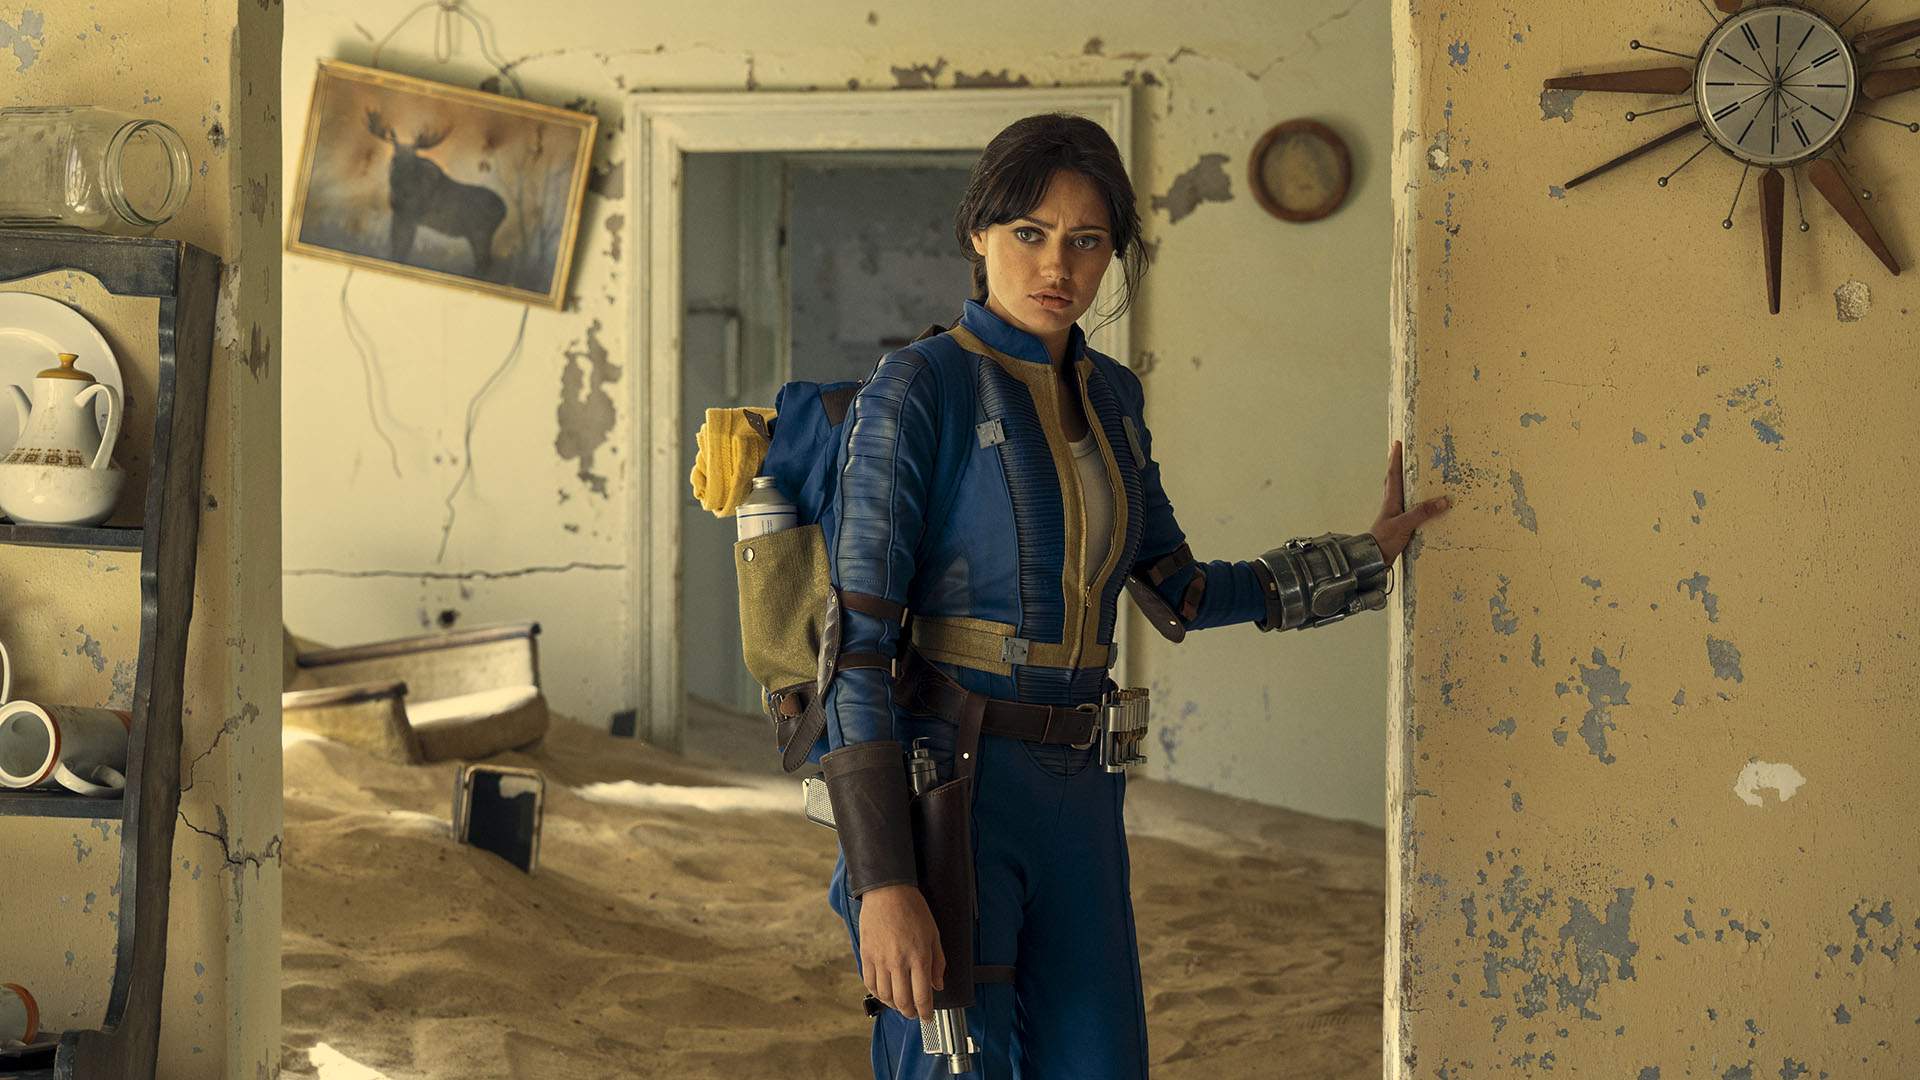 Get Ready for an Absolute Blast: 'Fallout' Is the Latest Superb Small-Screen Adaptation of a Hit Video Game